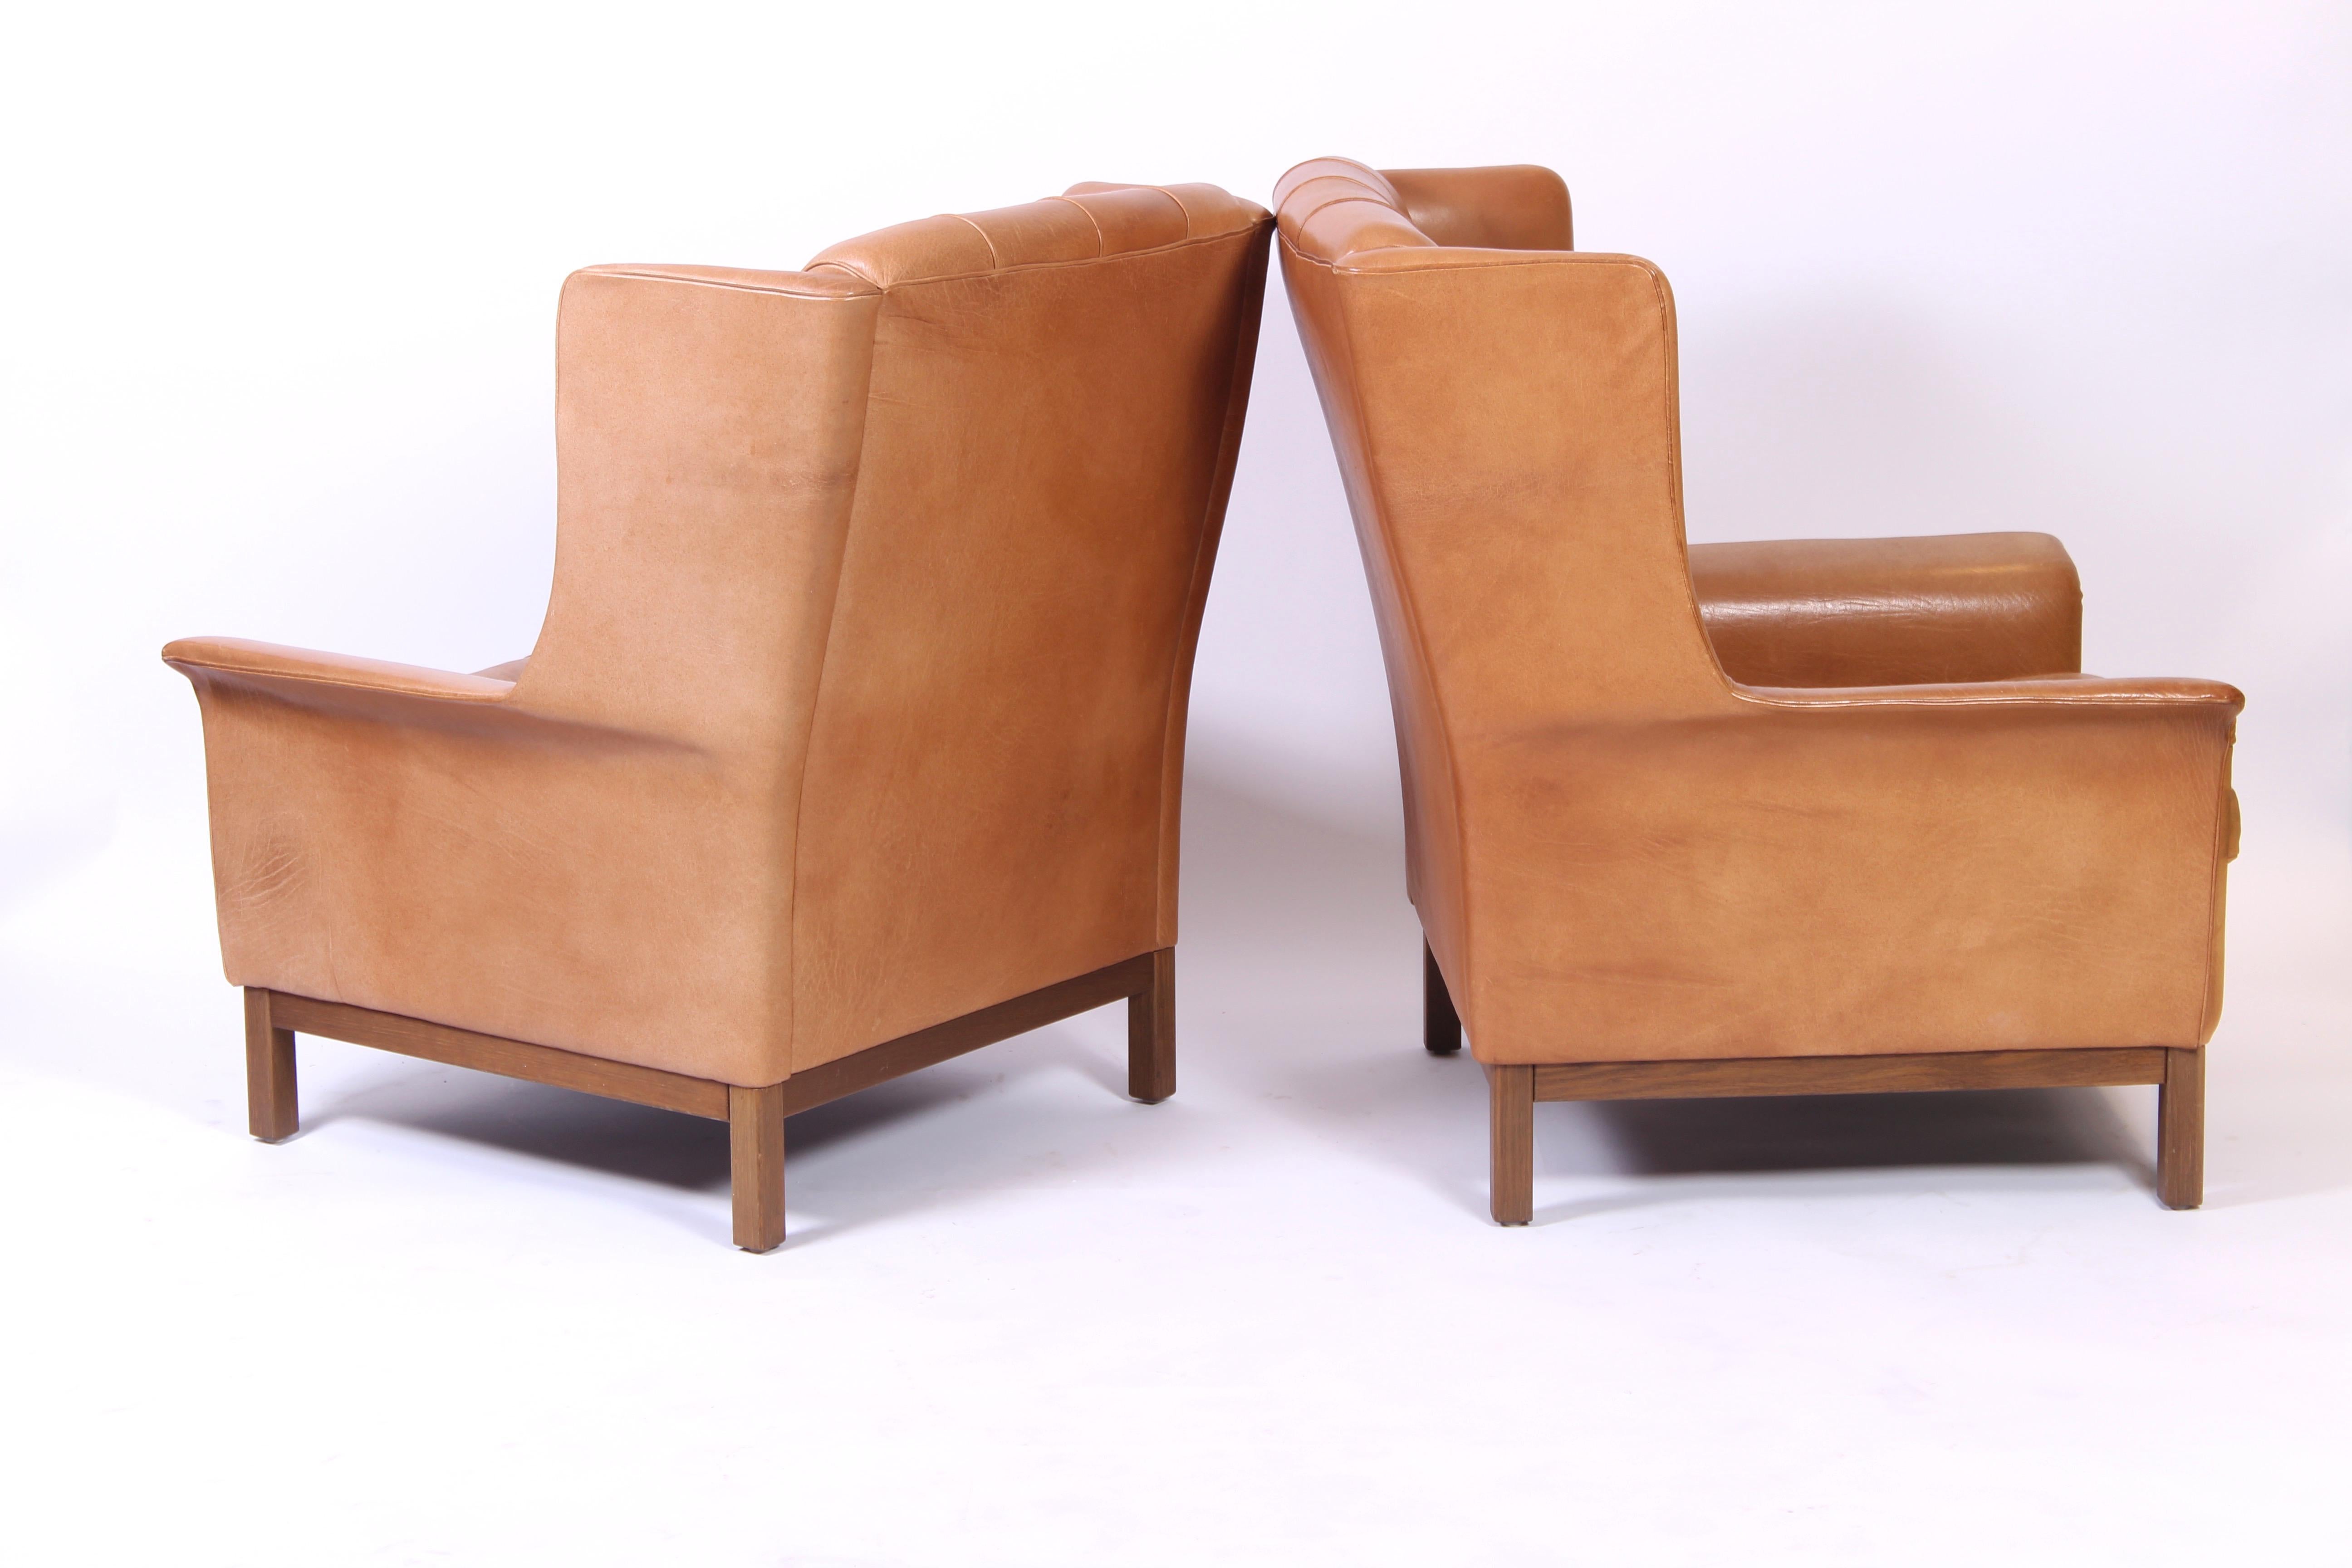 Pair of Midcentury Arne Norell Lounge Chairs with Ottoman, 1960s In Good Condition For Sale In Malmo, SE